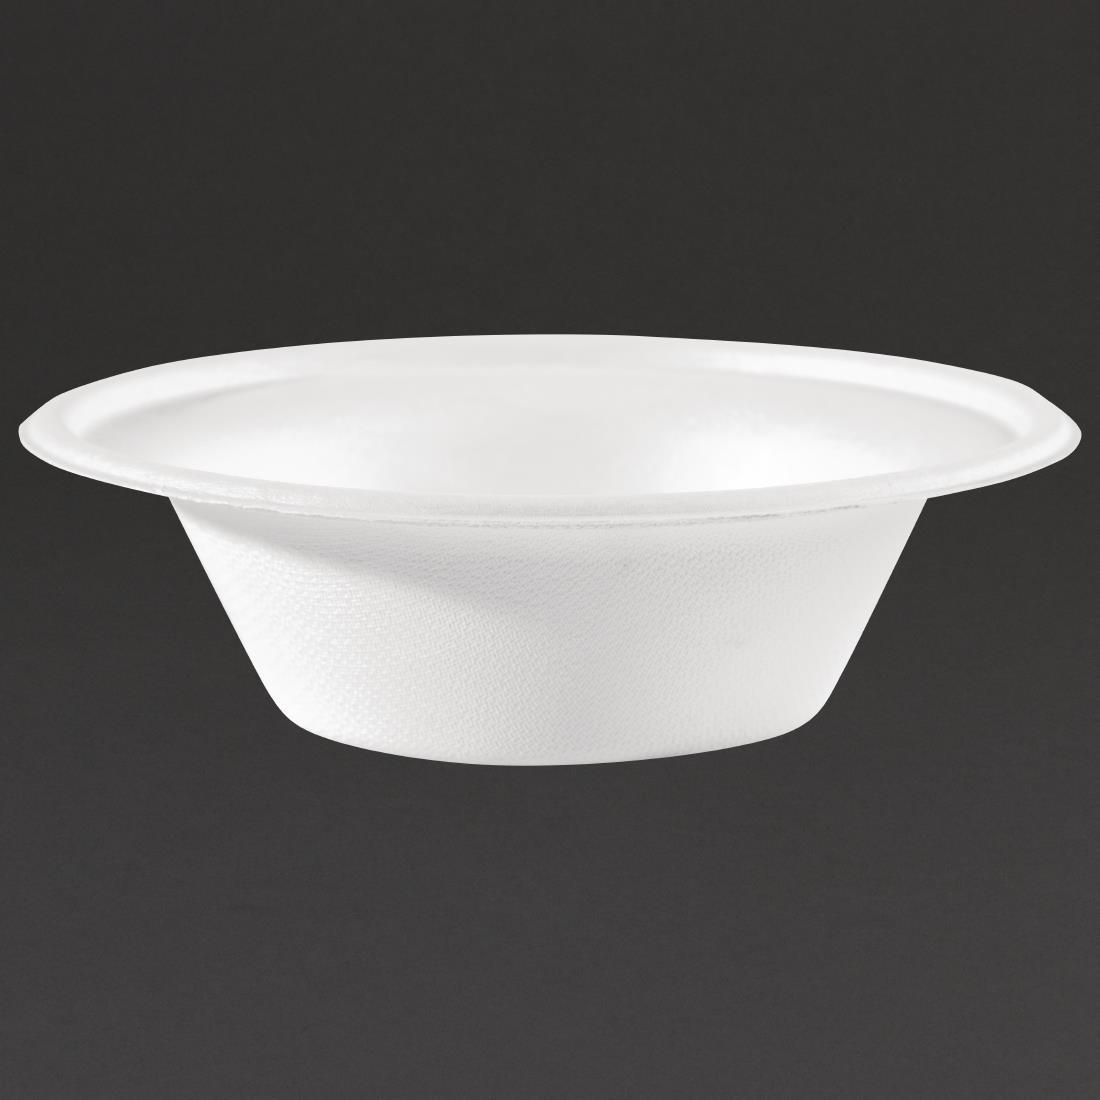 Fiesta Compostable Bagasse Bowls Round 10oz (Pack of 50) - CW906  - 1